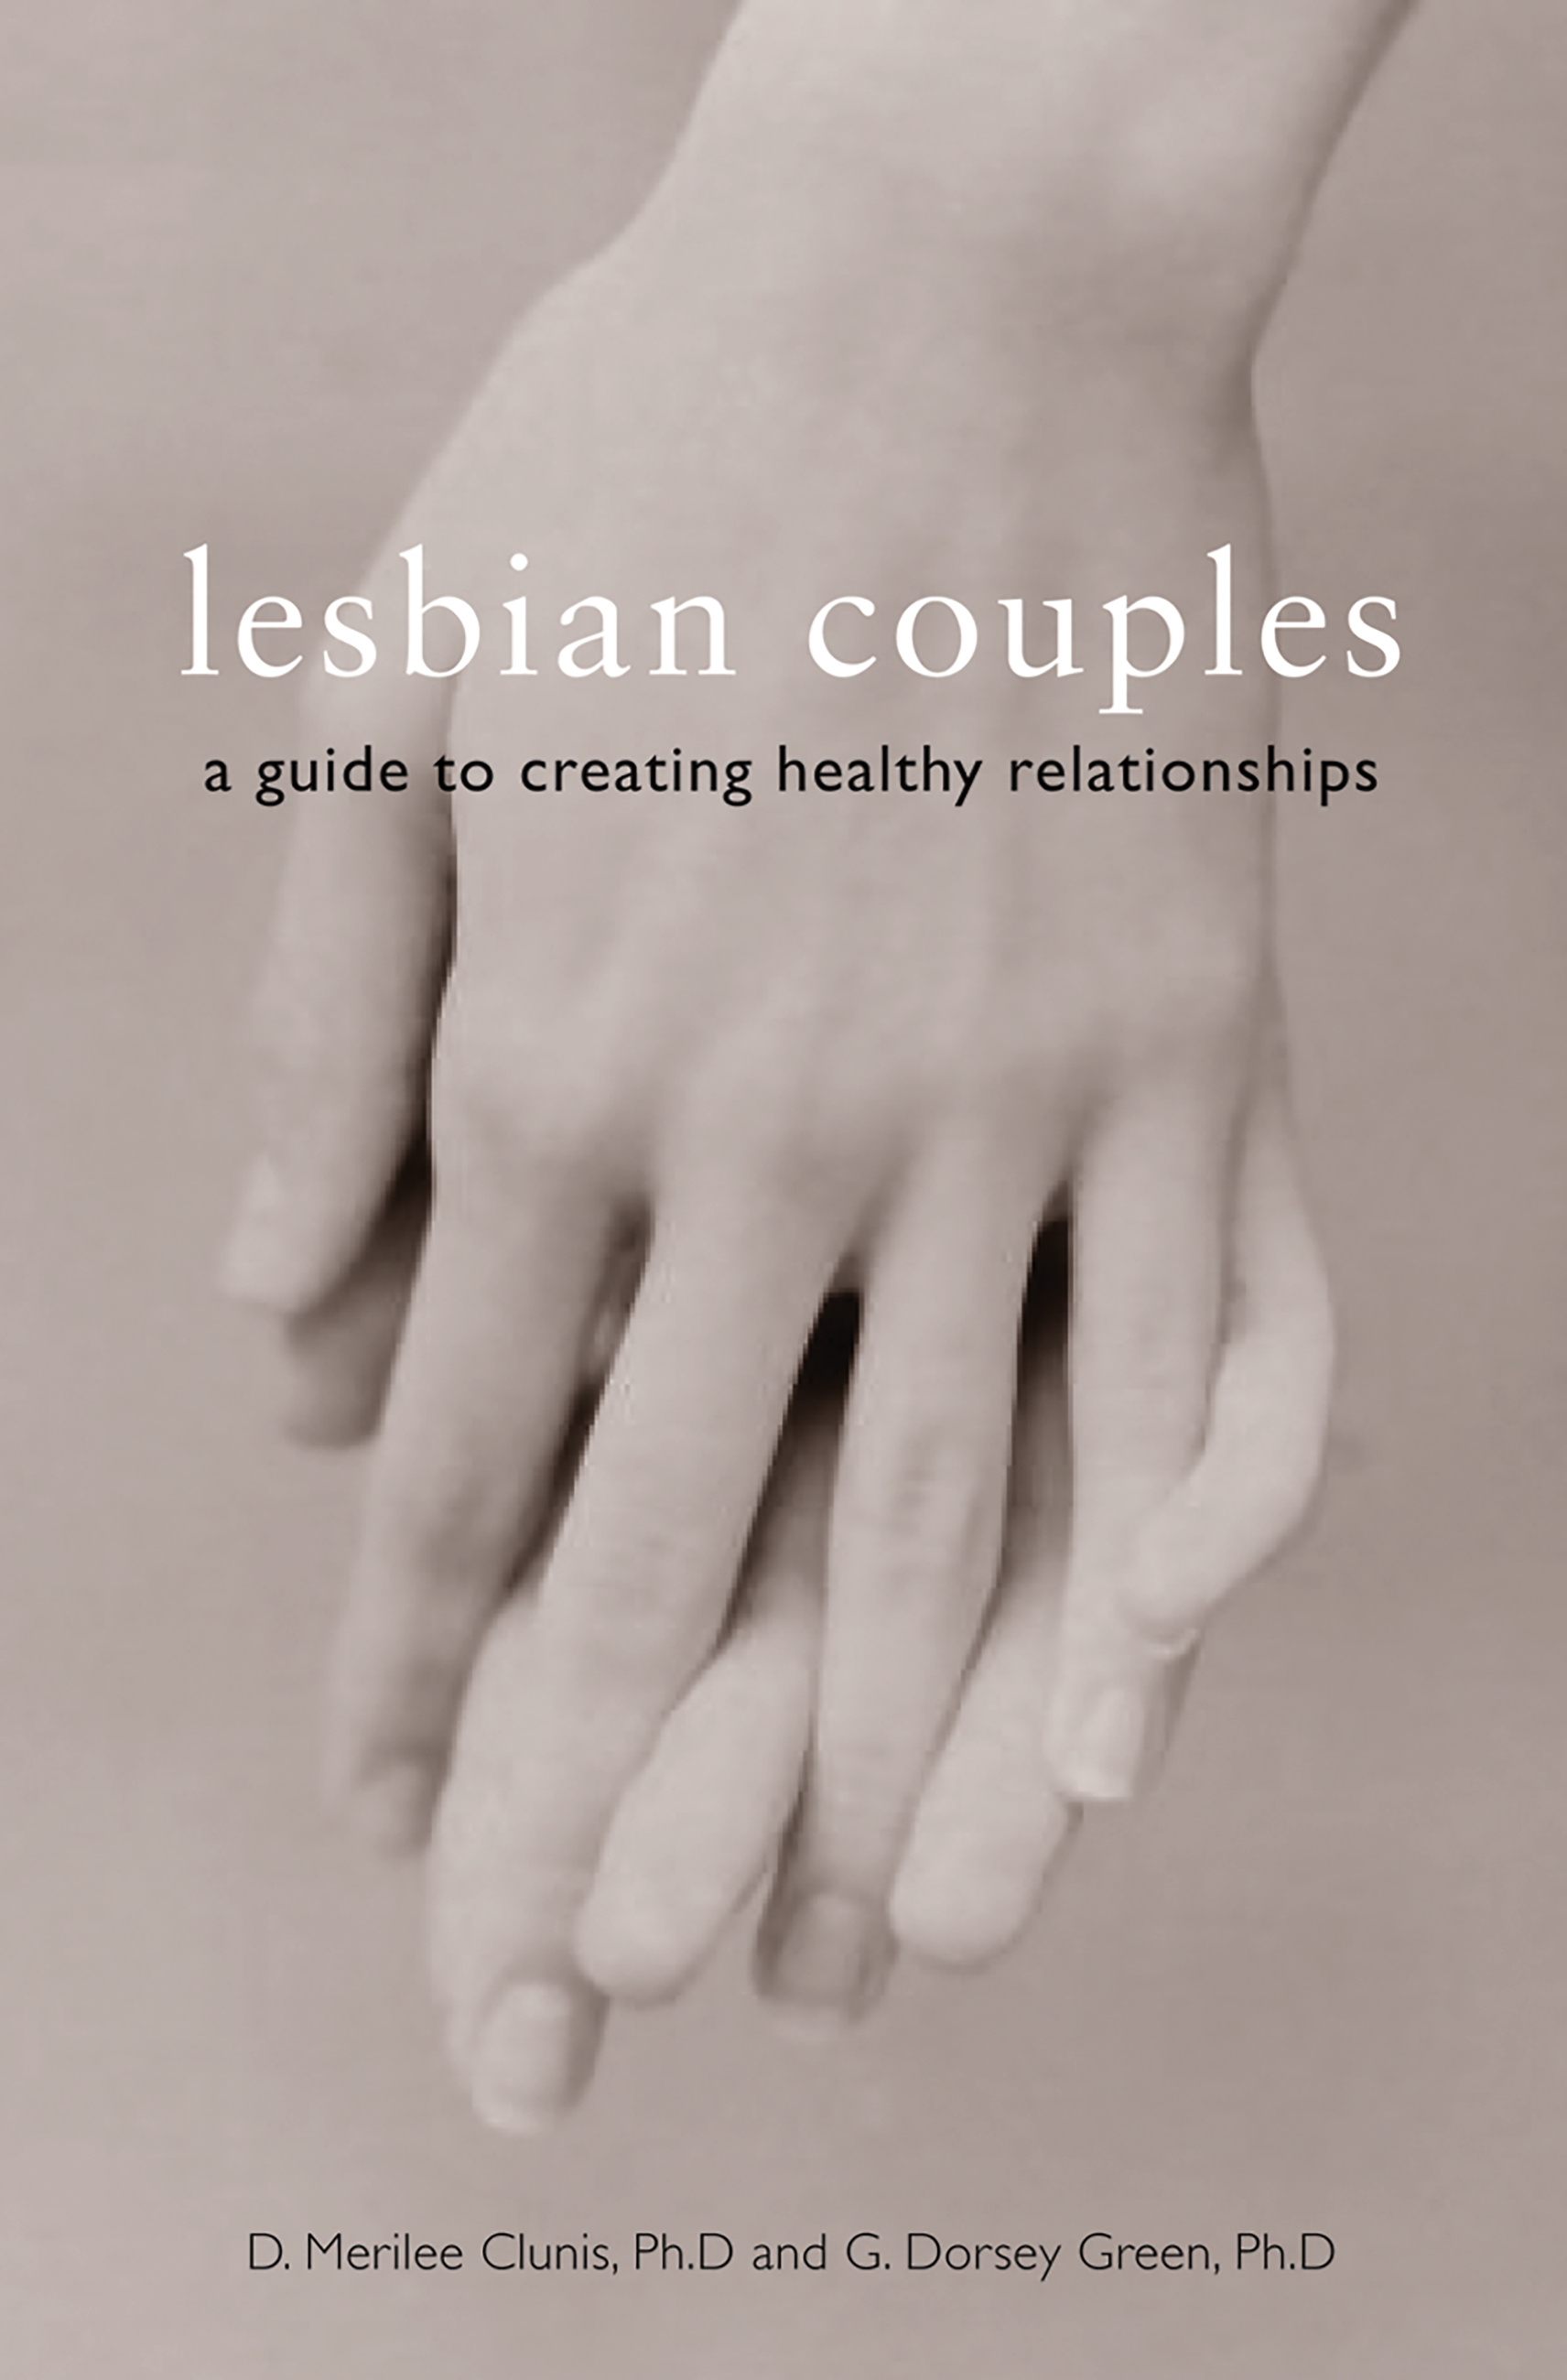 Lesbian Couples by D